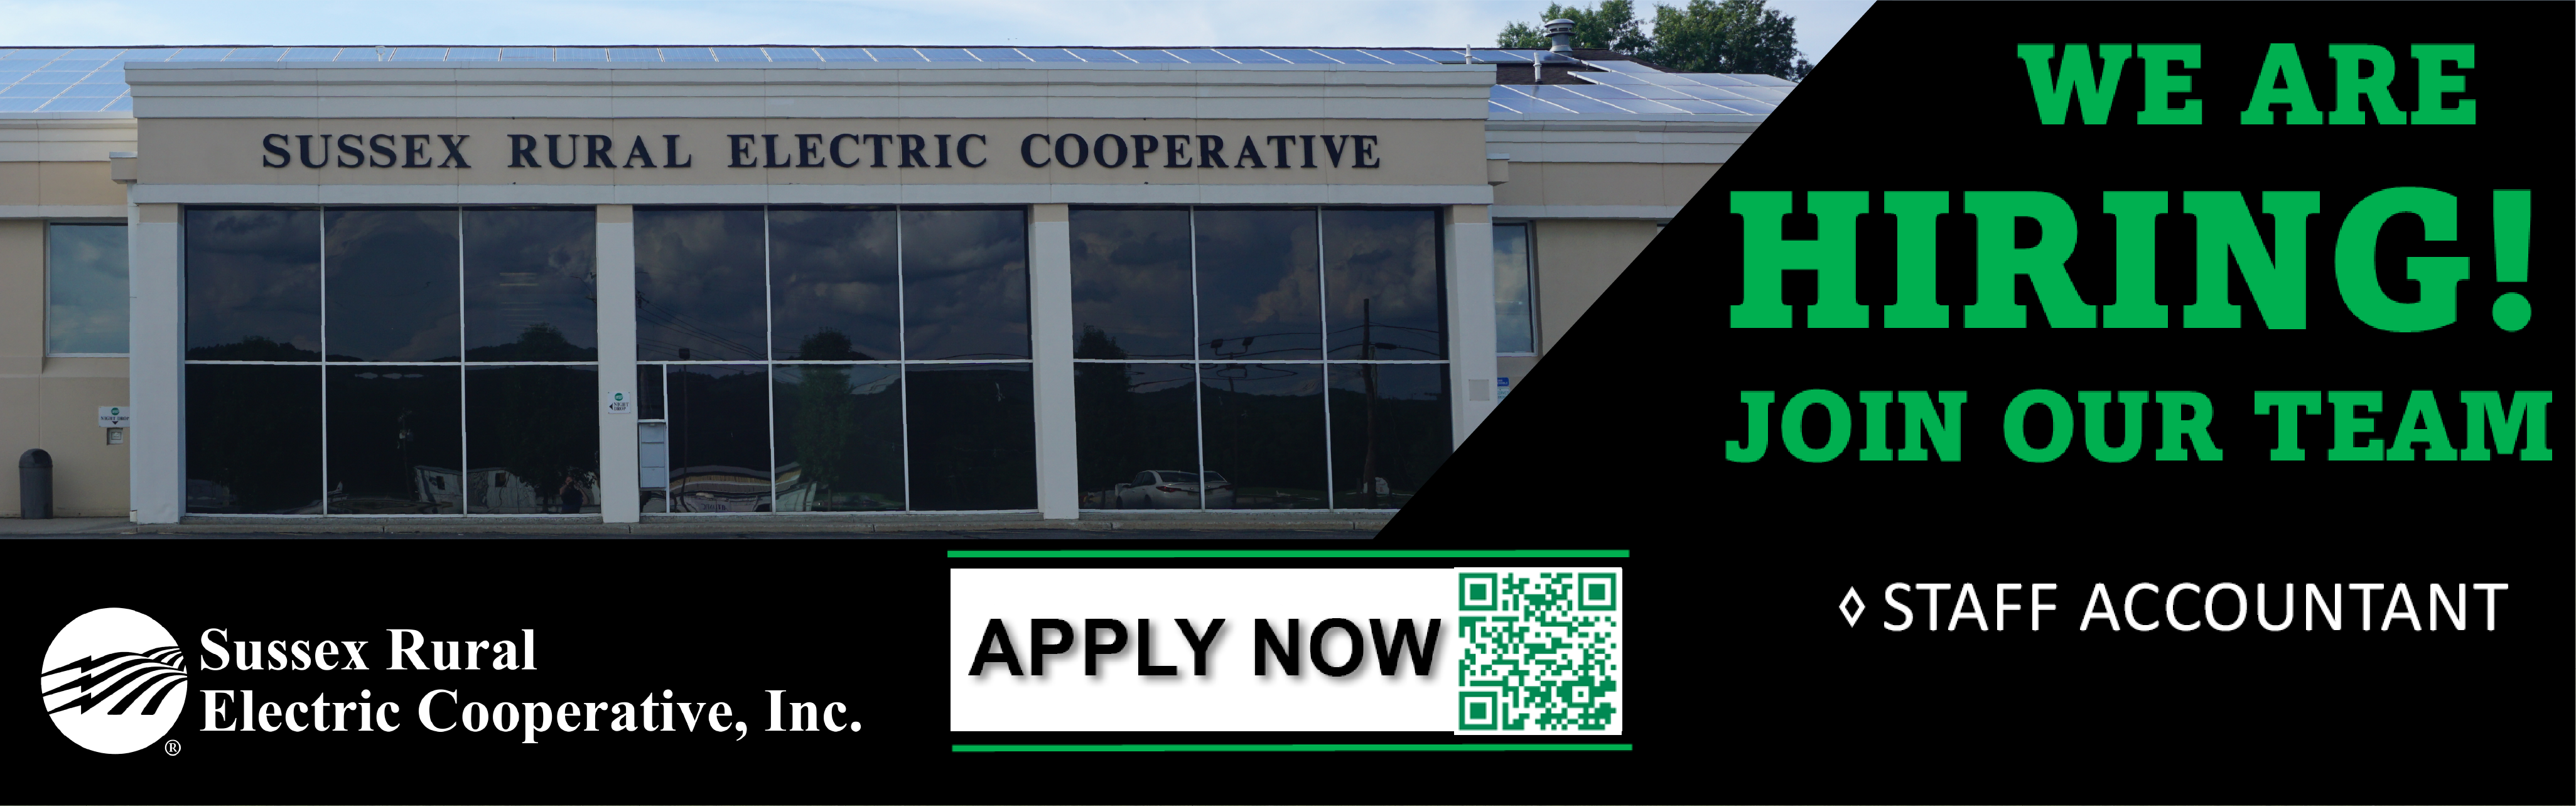 Sussex Rural Electric Cooperative, Inc. WE ARE HIRING! -Staff Acountant APPLY NOW